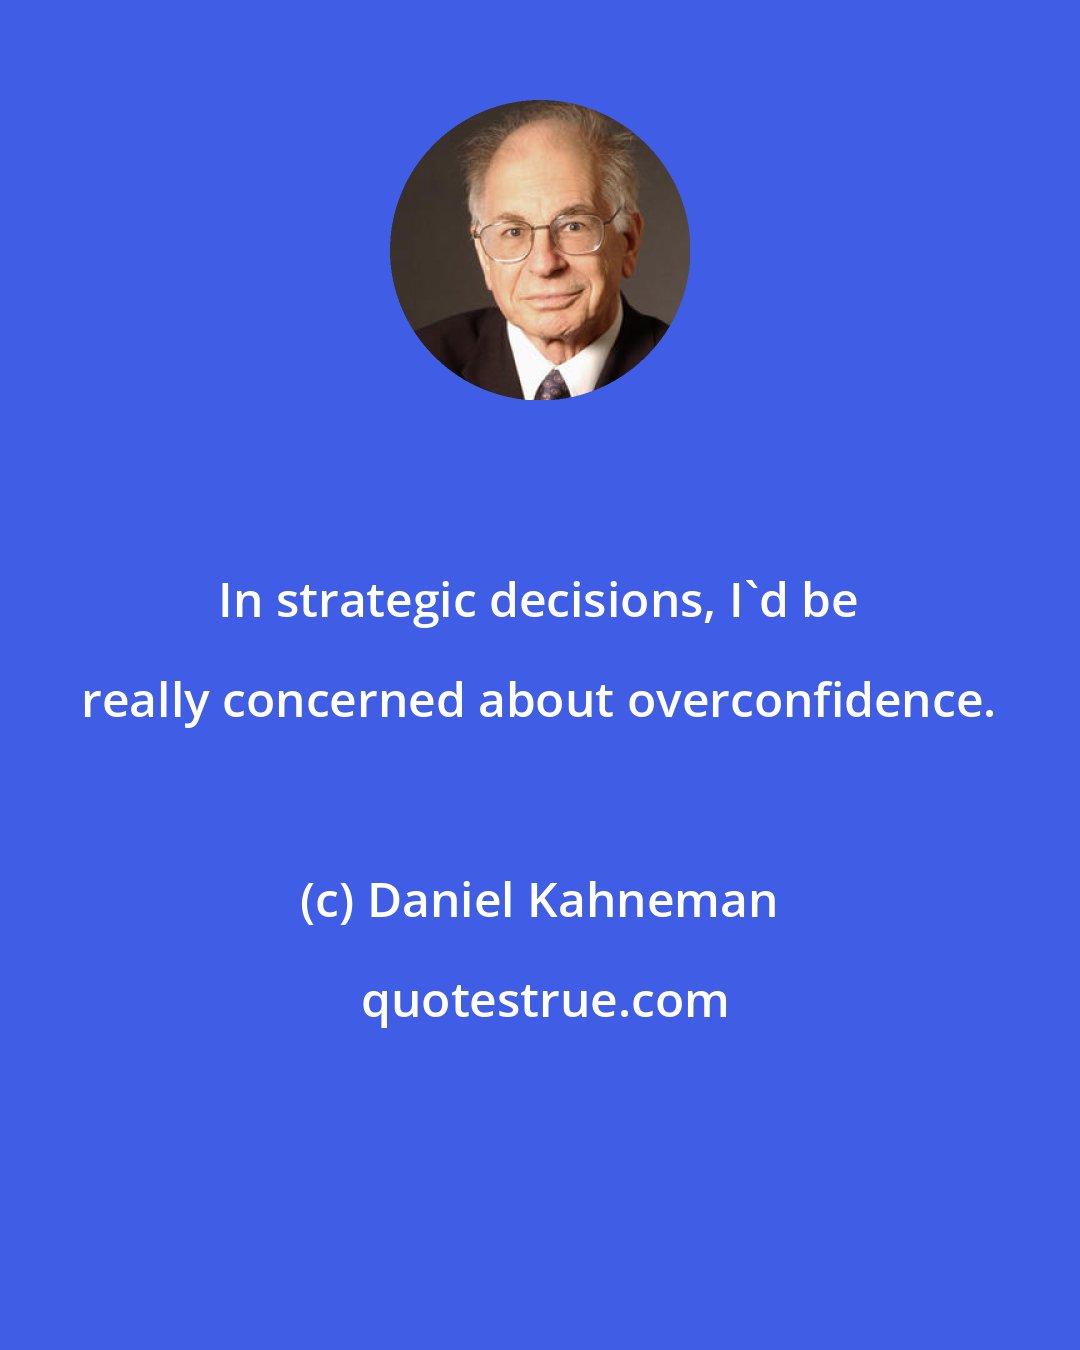 Daniel Kahneman: In strategic decisions, I'd be really concerned about overconfidence.